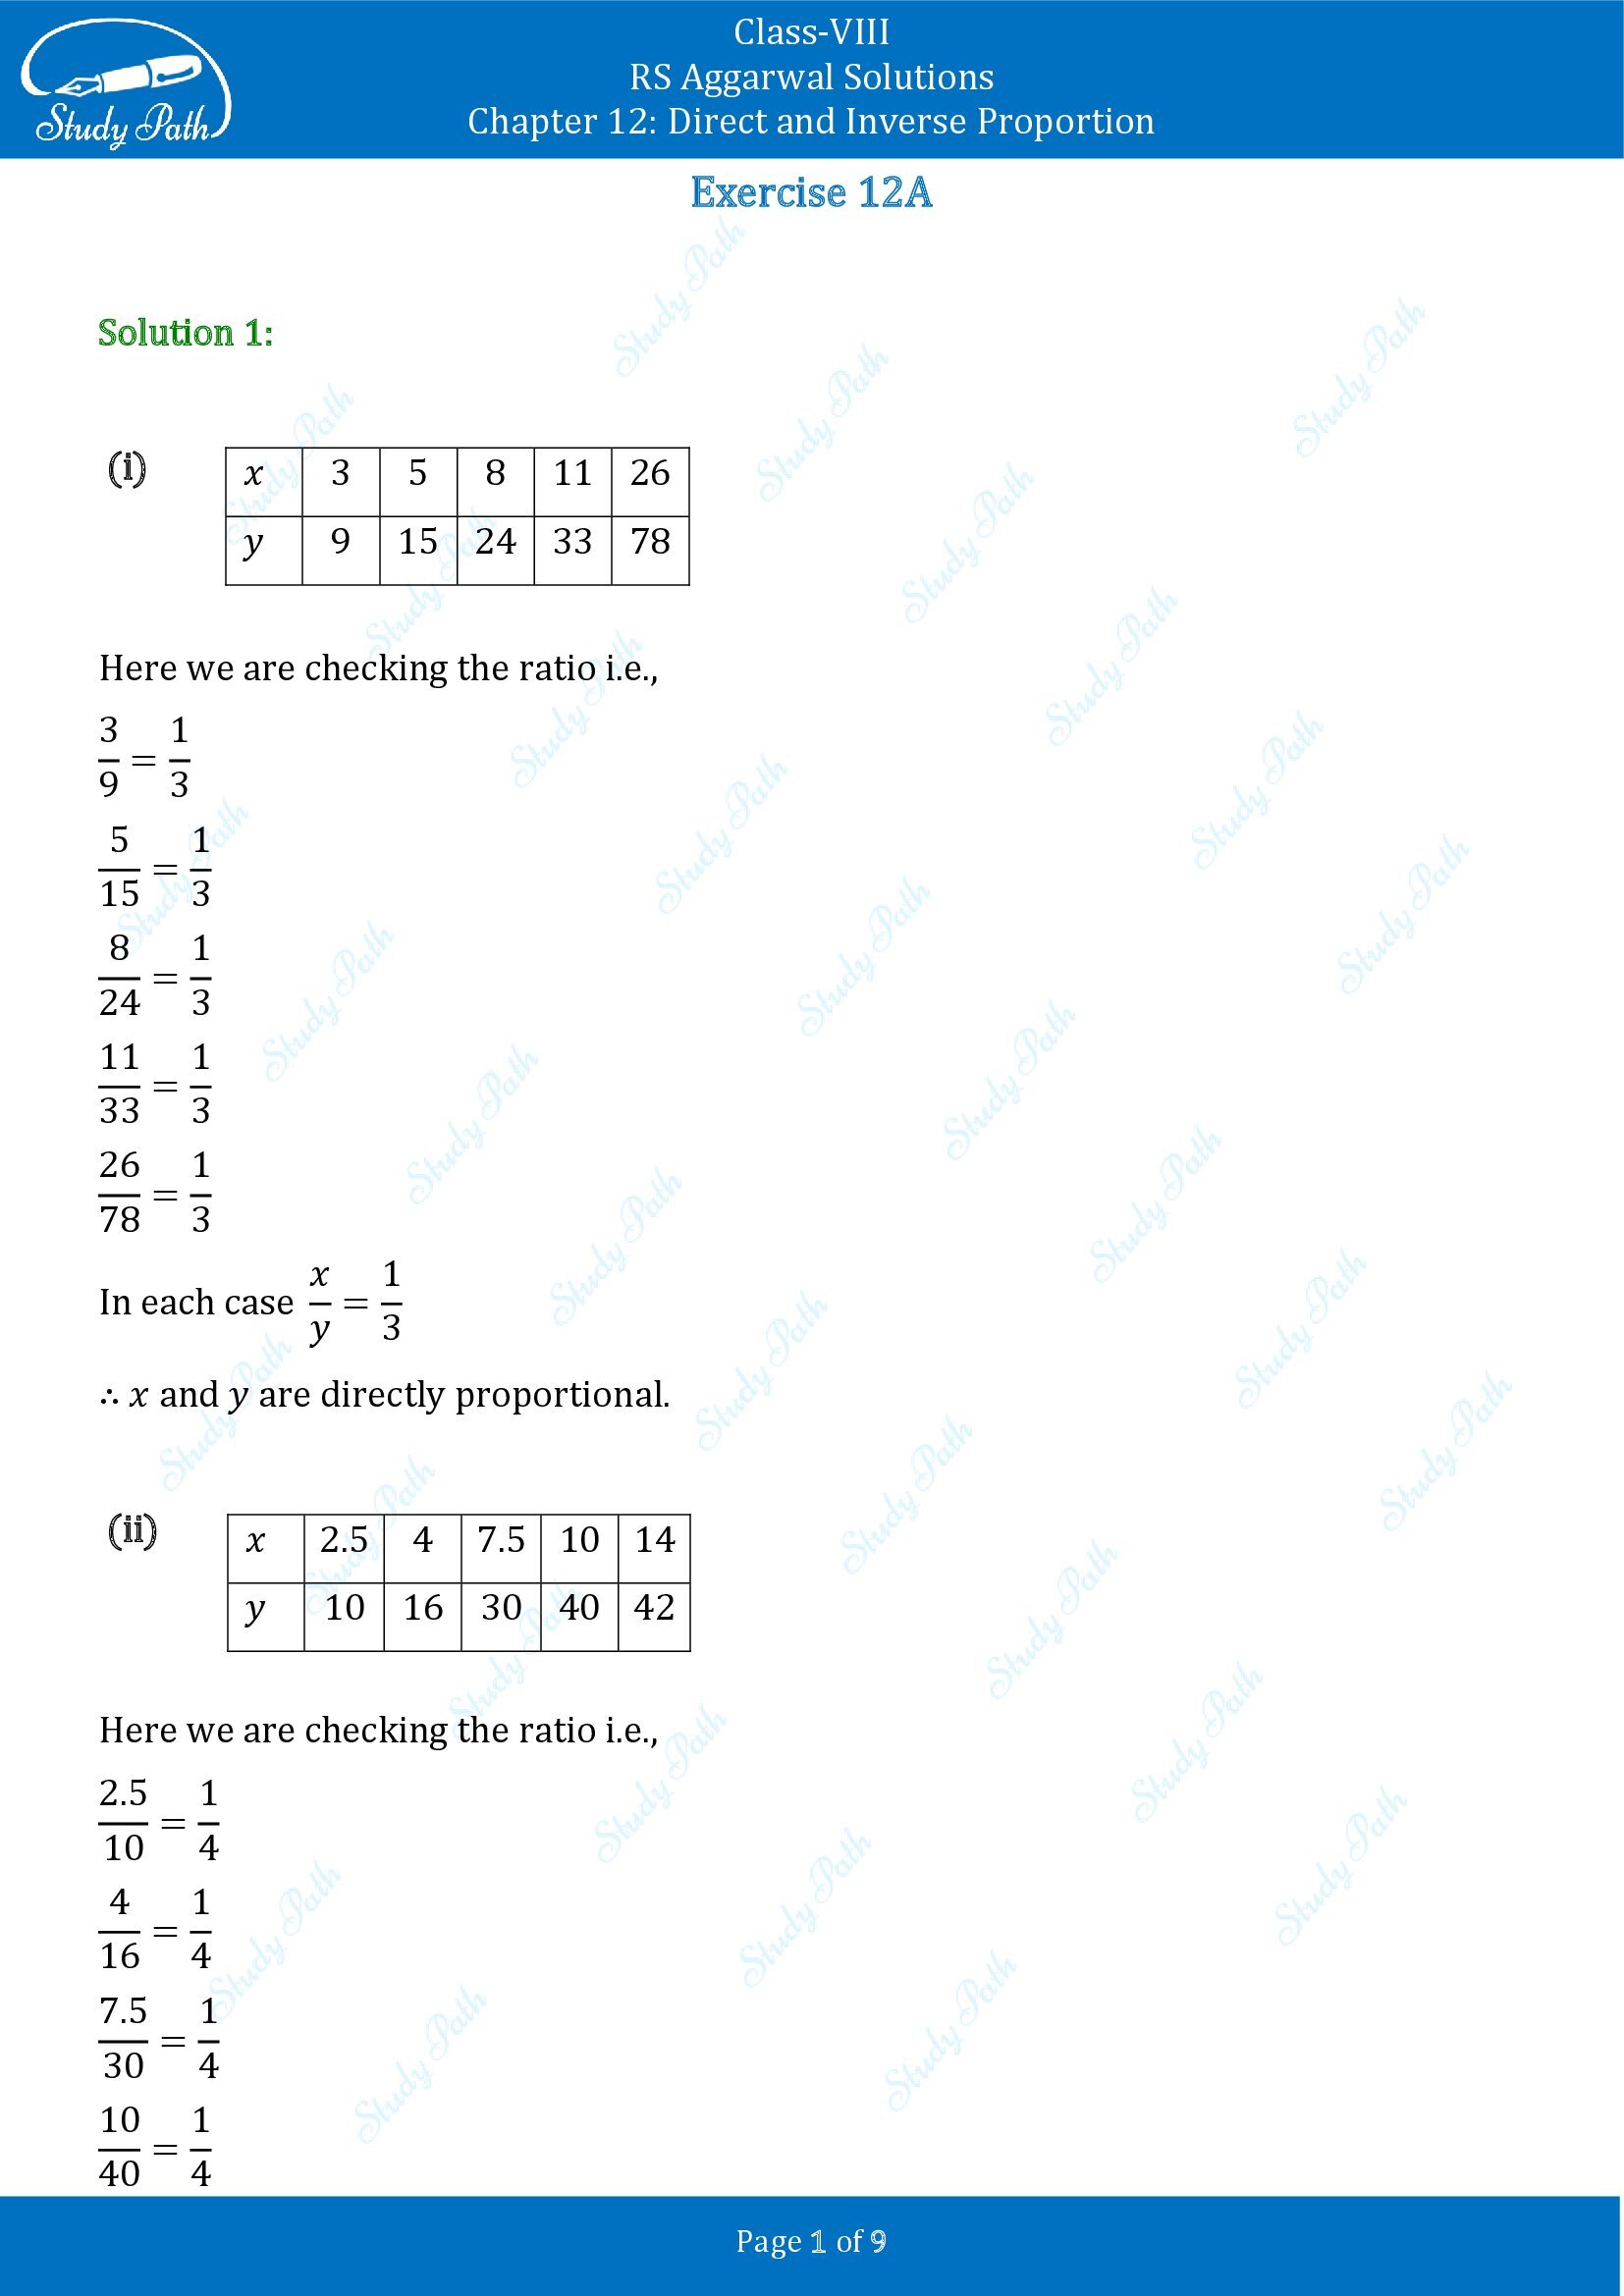 RS Aggarwal Solutions Class 8 Chapter 12 Direct and Inverse Proportion Exercise 12A 00001